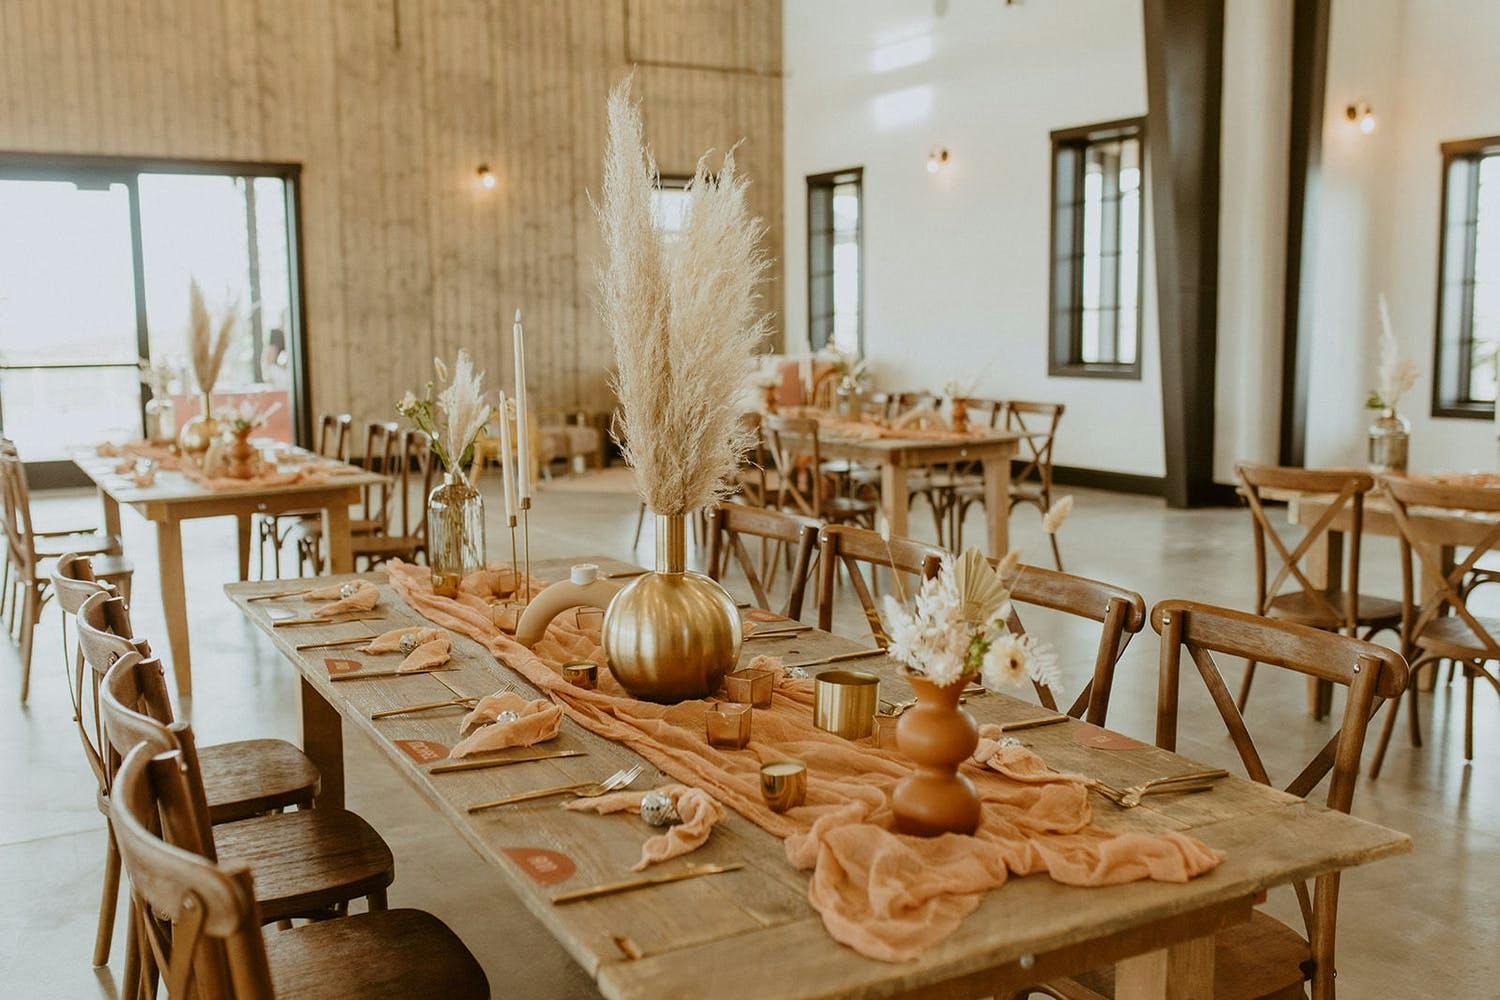 Modern Rustic Wedding With Eclectic Centerpieces, Pampas Grass, and Peach Linen | PartySlate